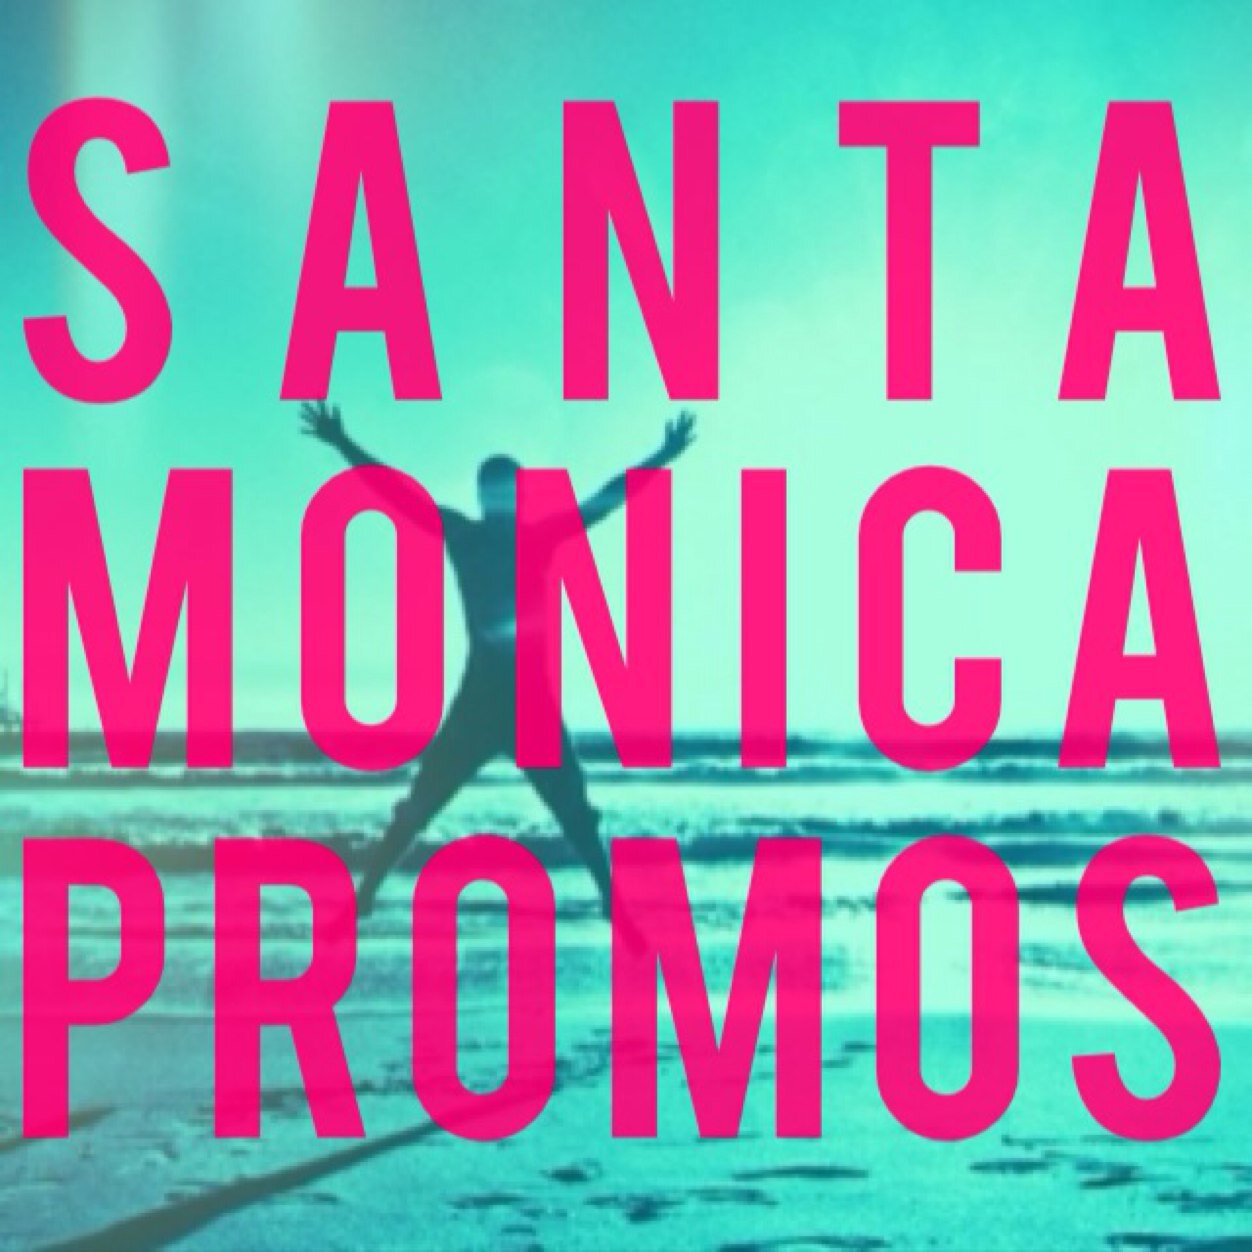 #SantaMonica Promotions, Special Offers Happenings & MORE! Contact @SoNetMgt for regular promotion and/or #SocialMedia Services! :)